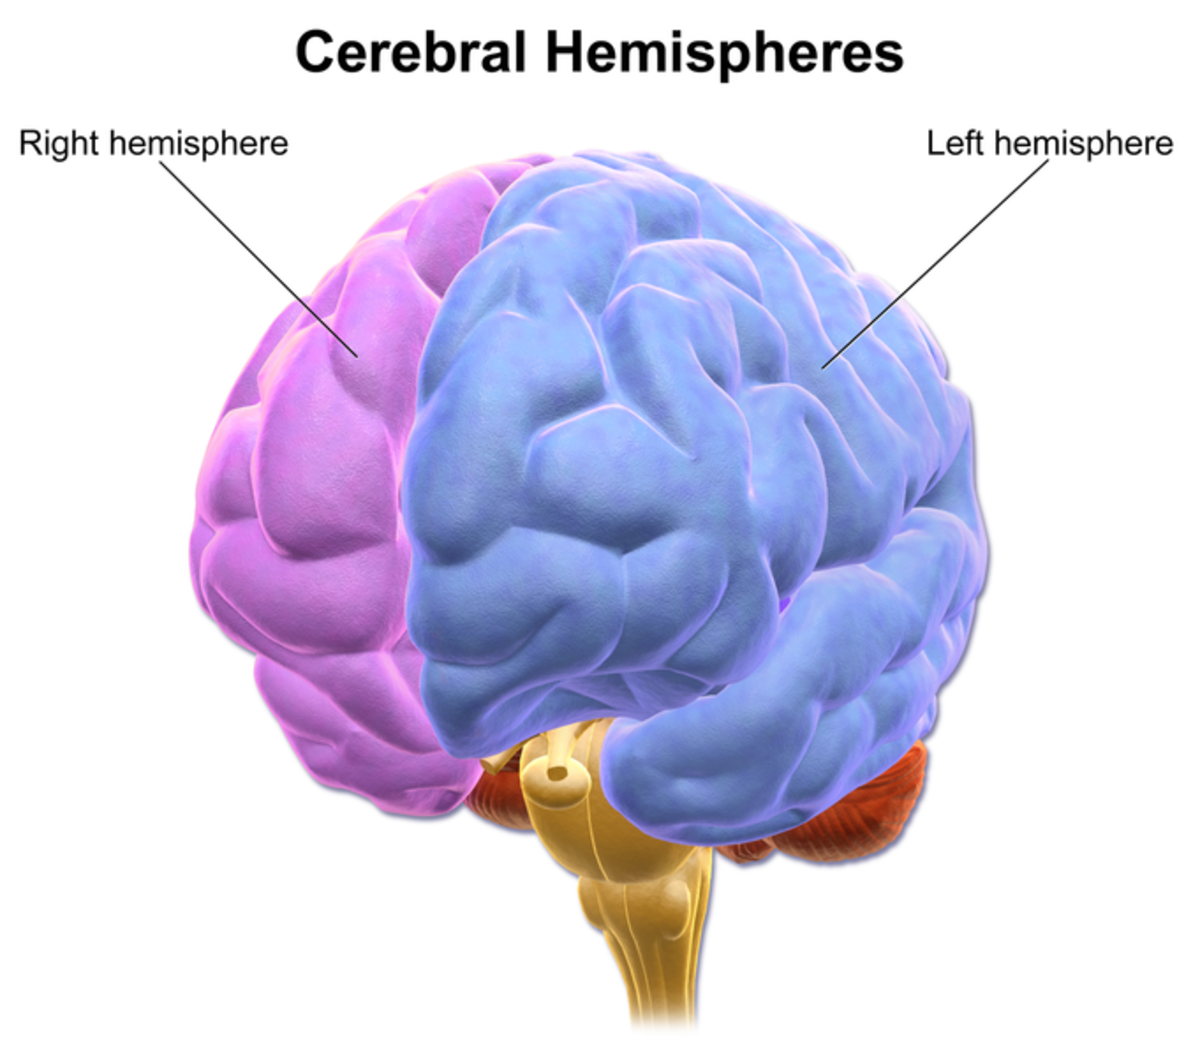 The cerebral hemispheres as viewed from the front of the brain